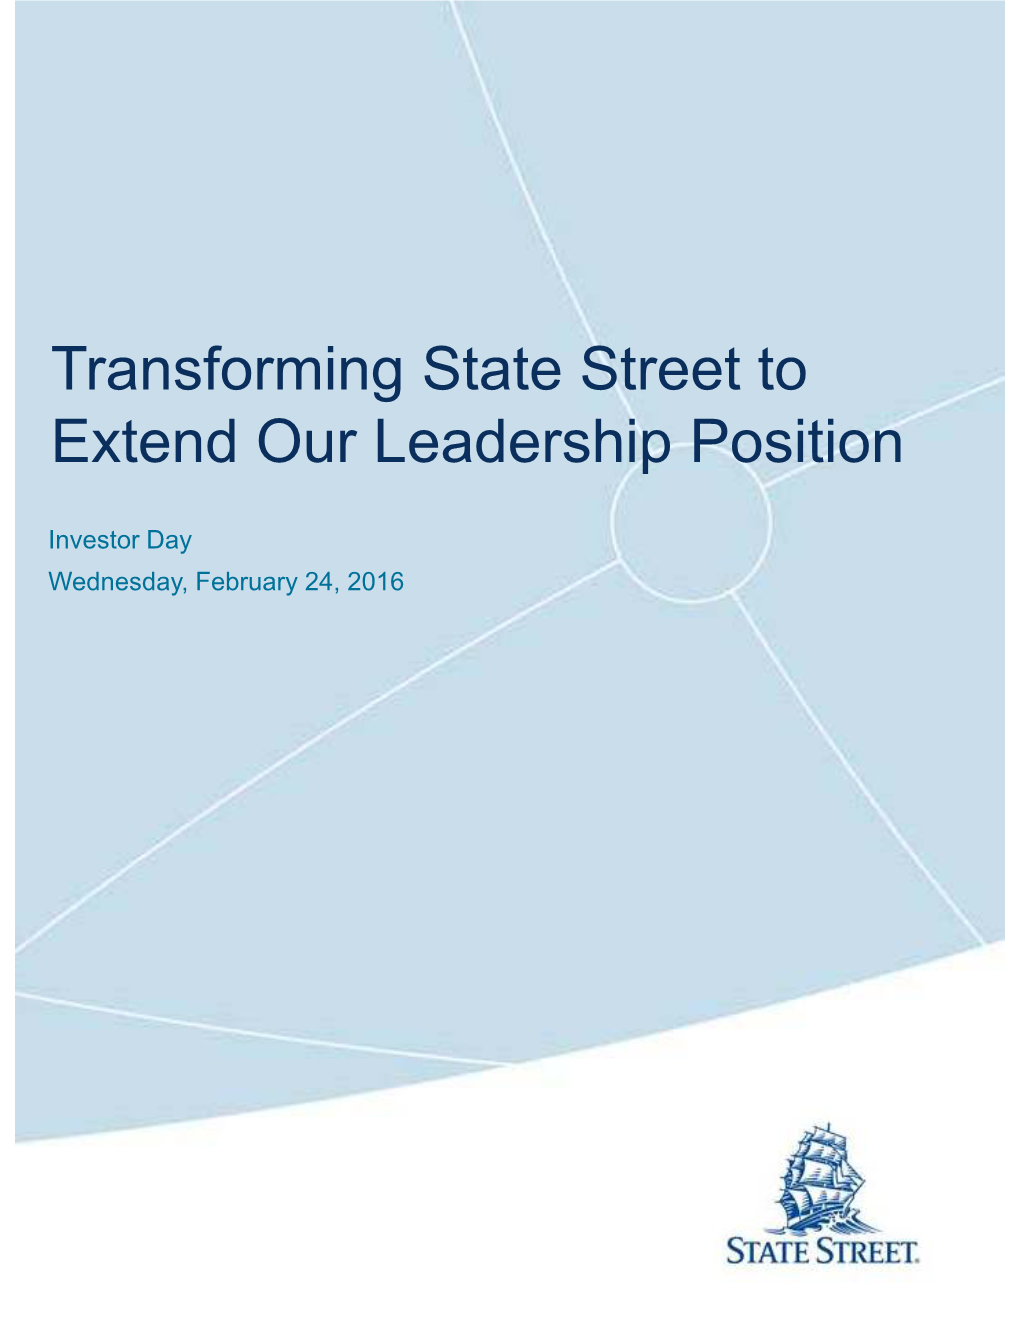 Transforming State Street to Extend Our Leadership Position